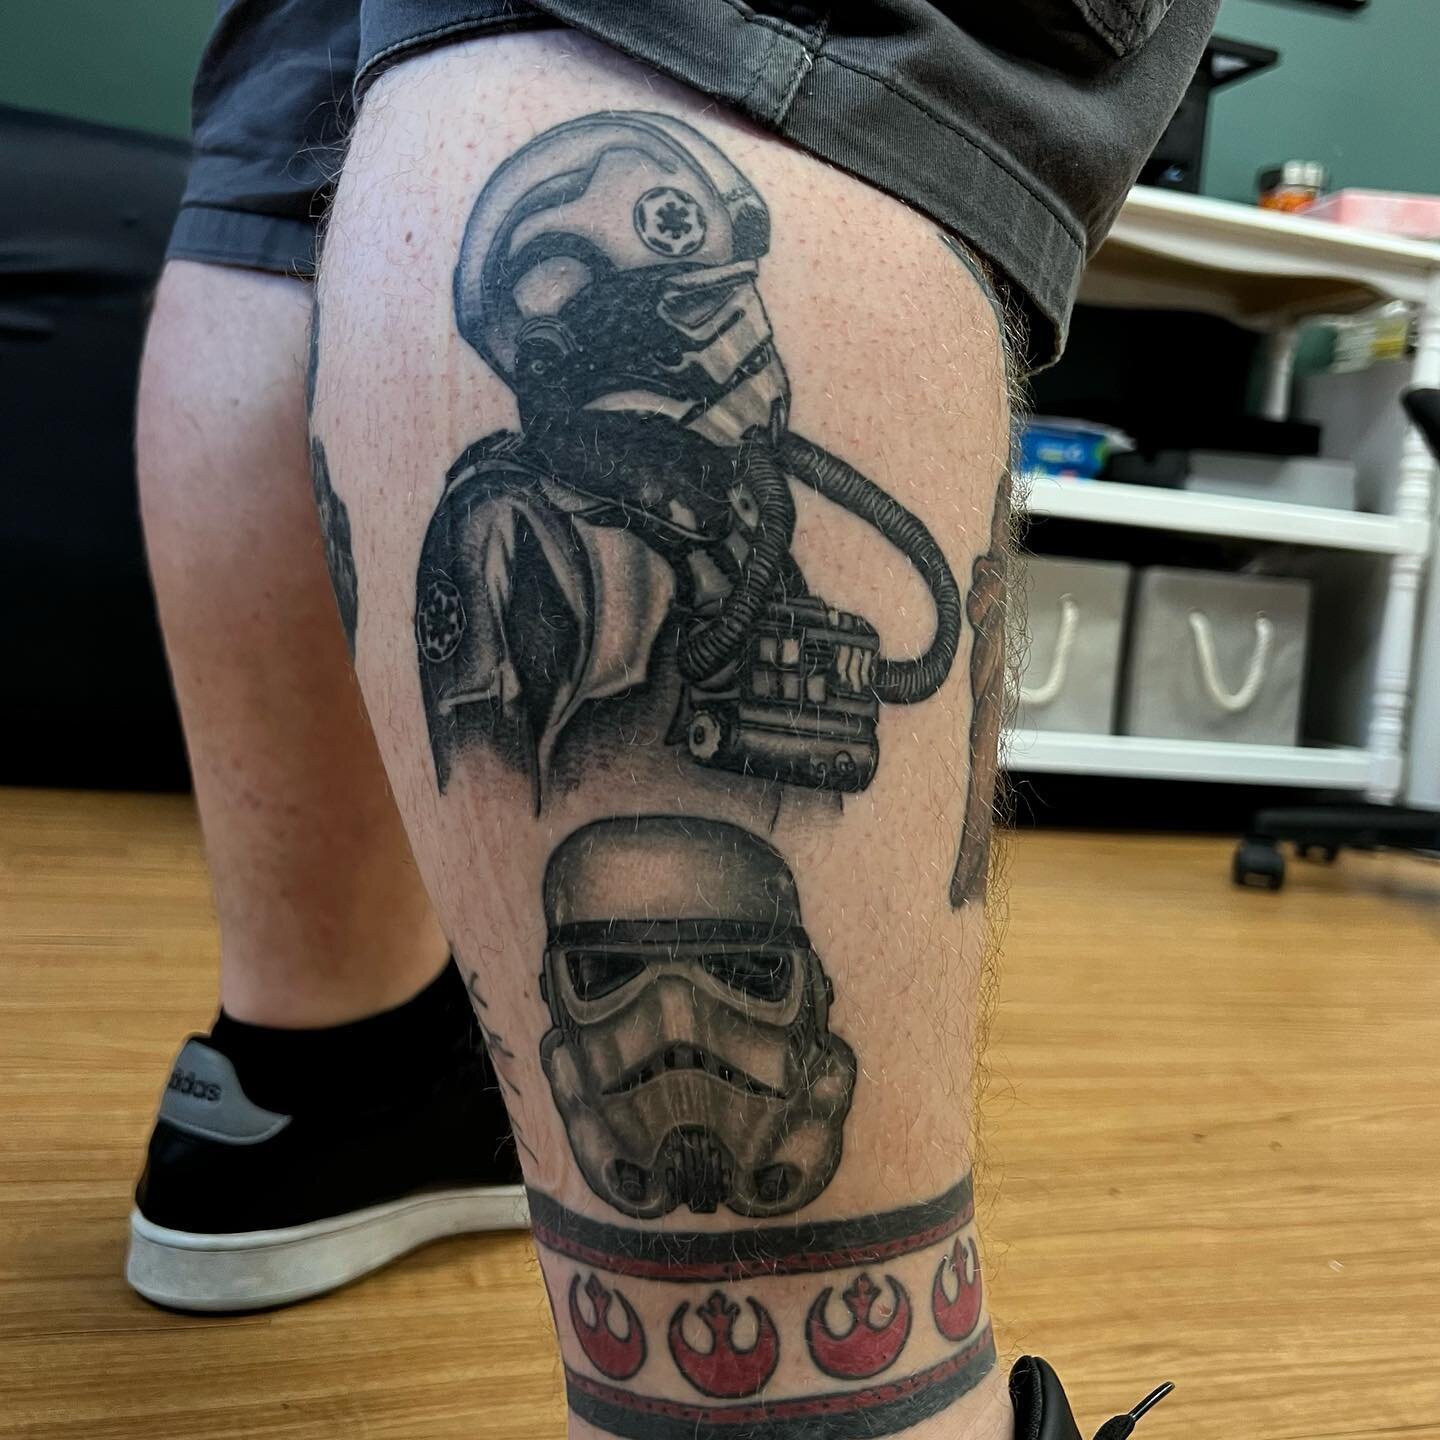 ☄️ this is the way ☄️ 

HEALED Tie fighter pilot, healed stormtrooper &amp; healed rebel alliance band ❤️&zwj;🔥 more Star Wars alwayssss 

@babalon.tattoo @eikondevice @cheyenne_tattooequipment @fkirons @anarchy_tattoo_supplies @mambaglide @dynamicc